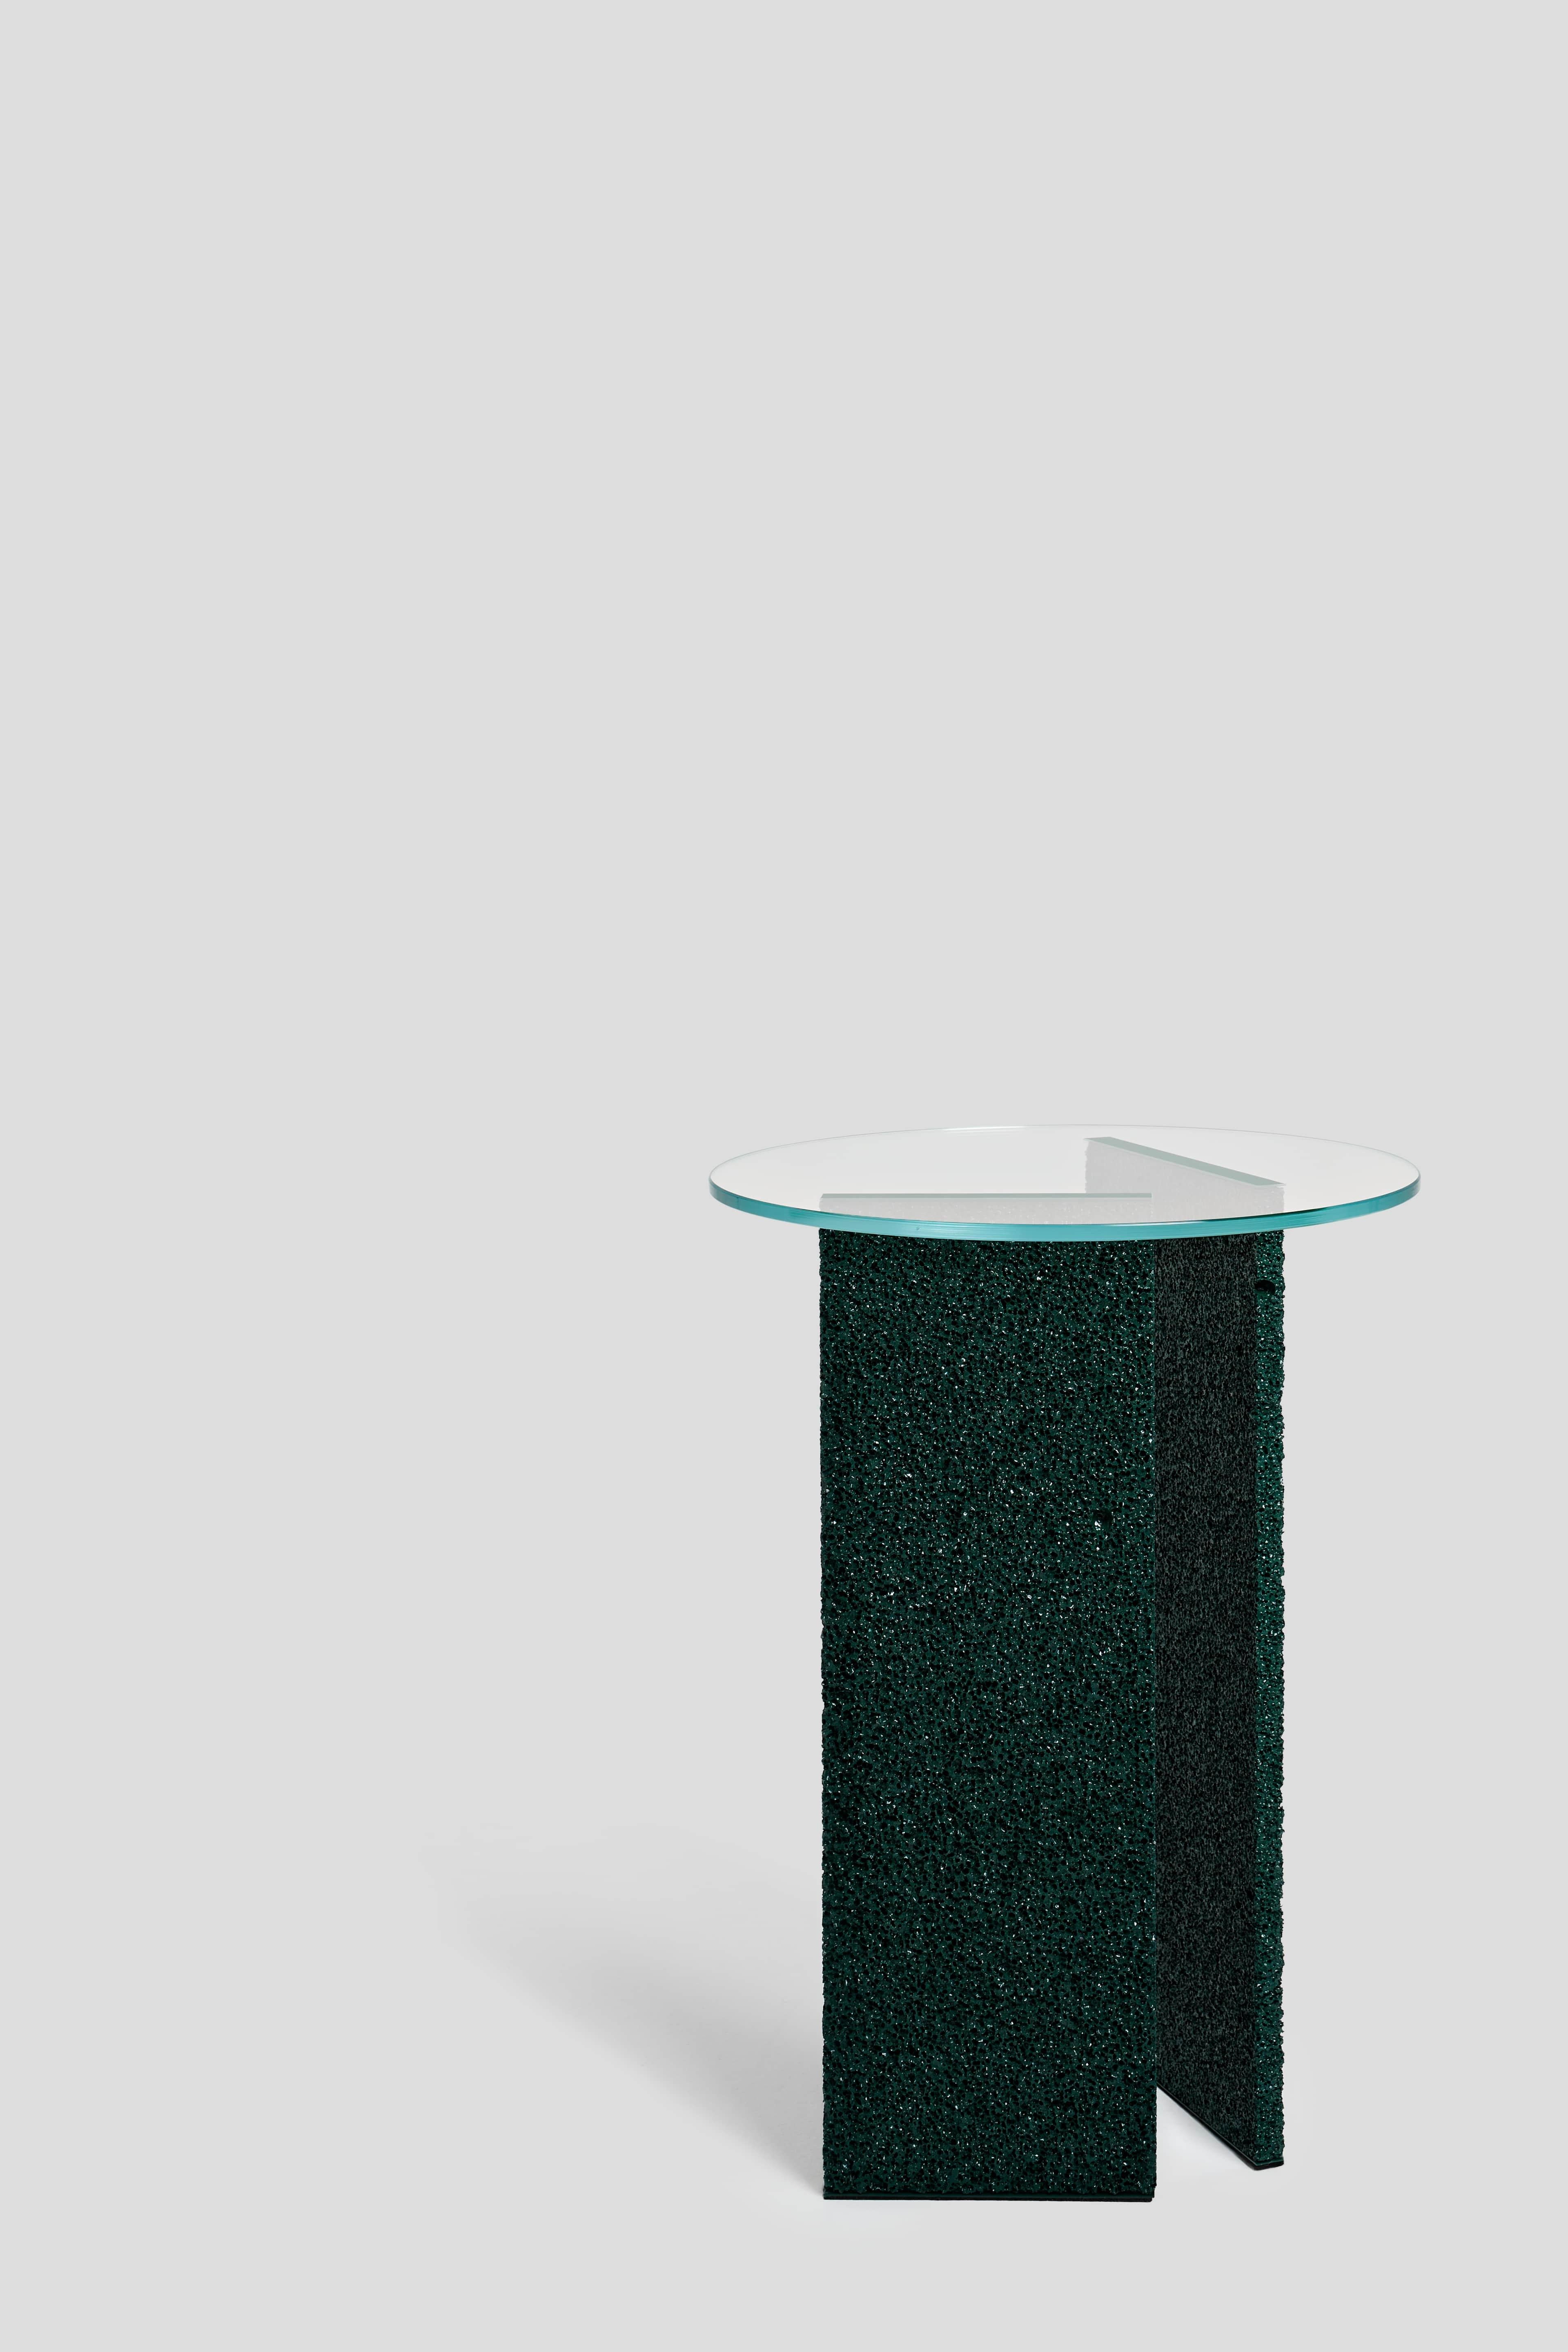 Cast SLAB Dark Green Textured Side Table With Glass Top For Sale